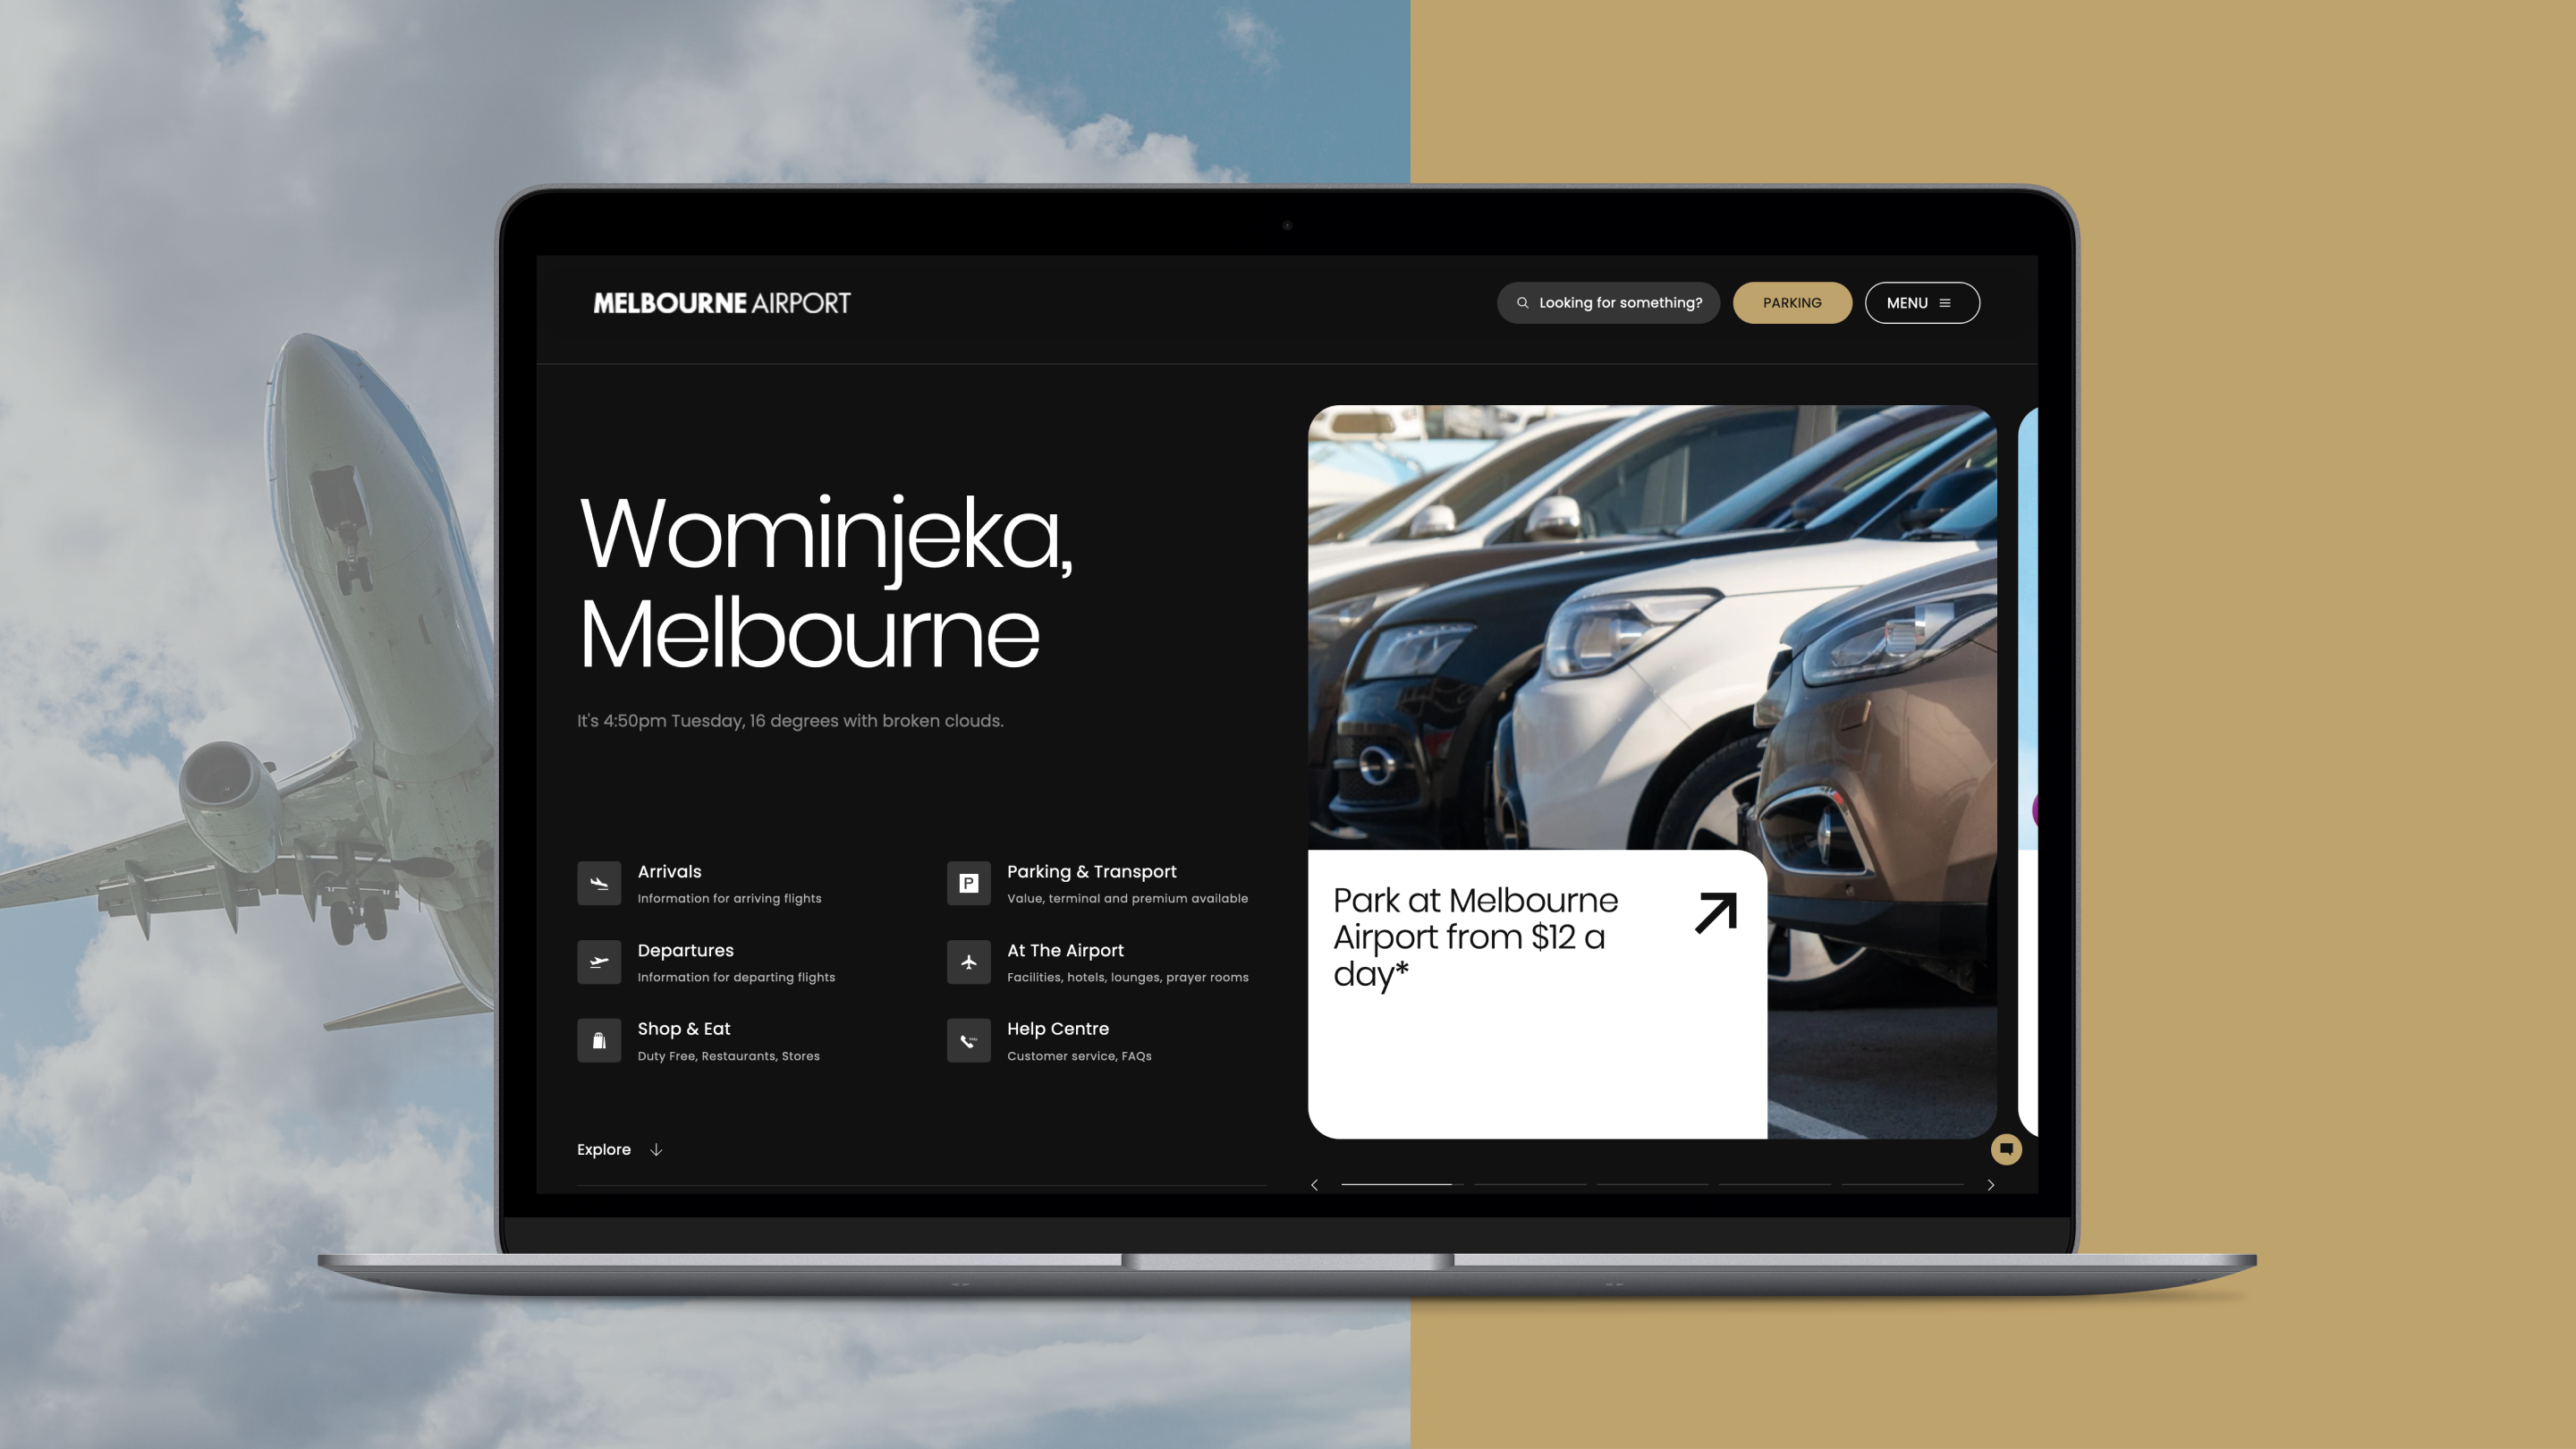 Melbourne Airport website home page